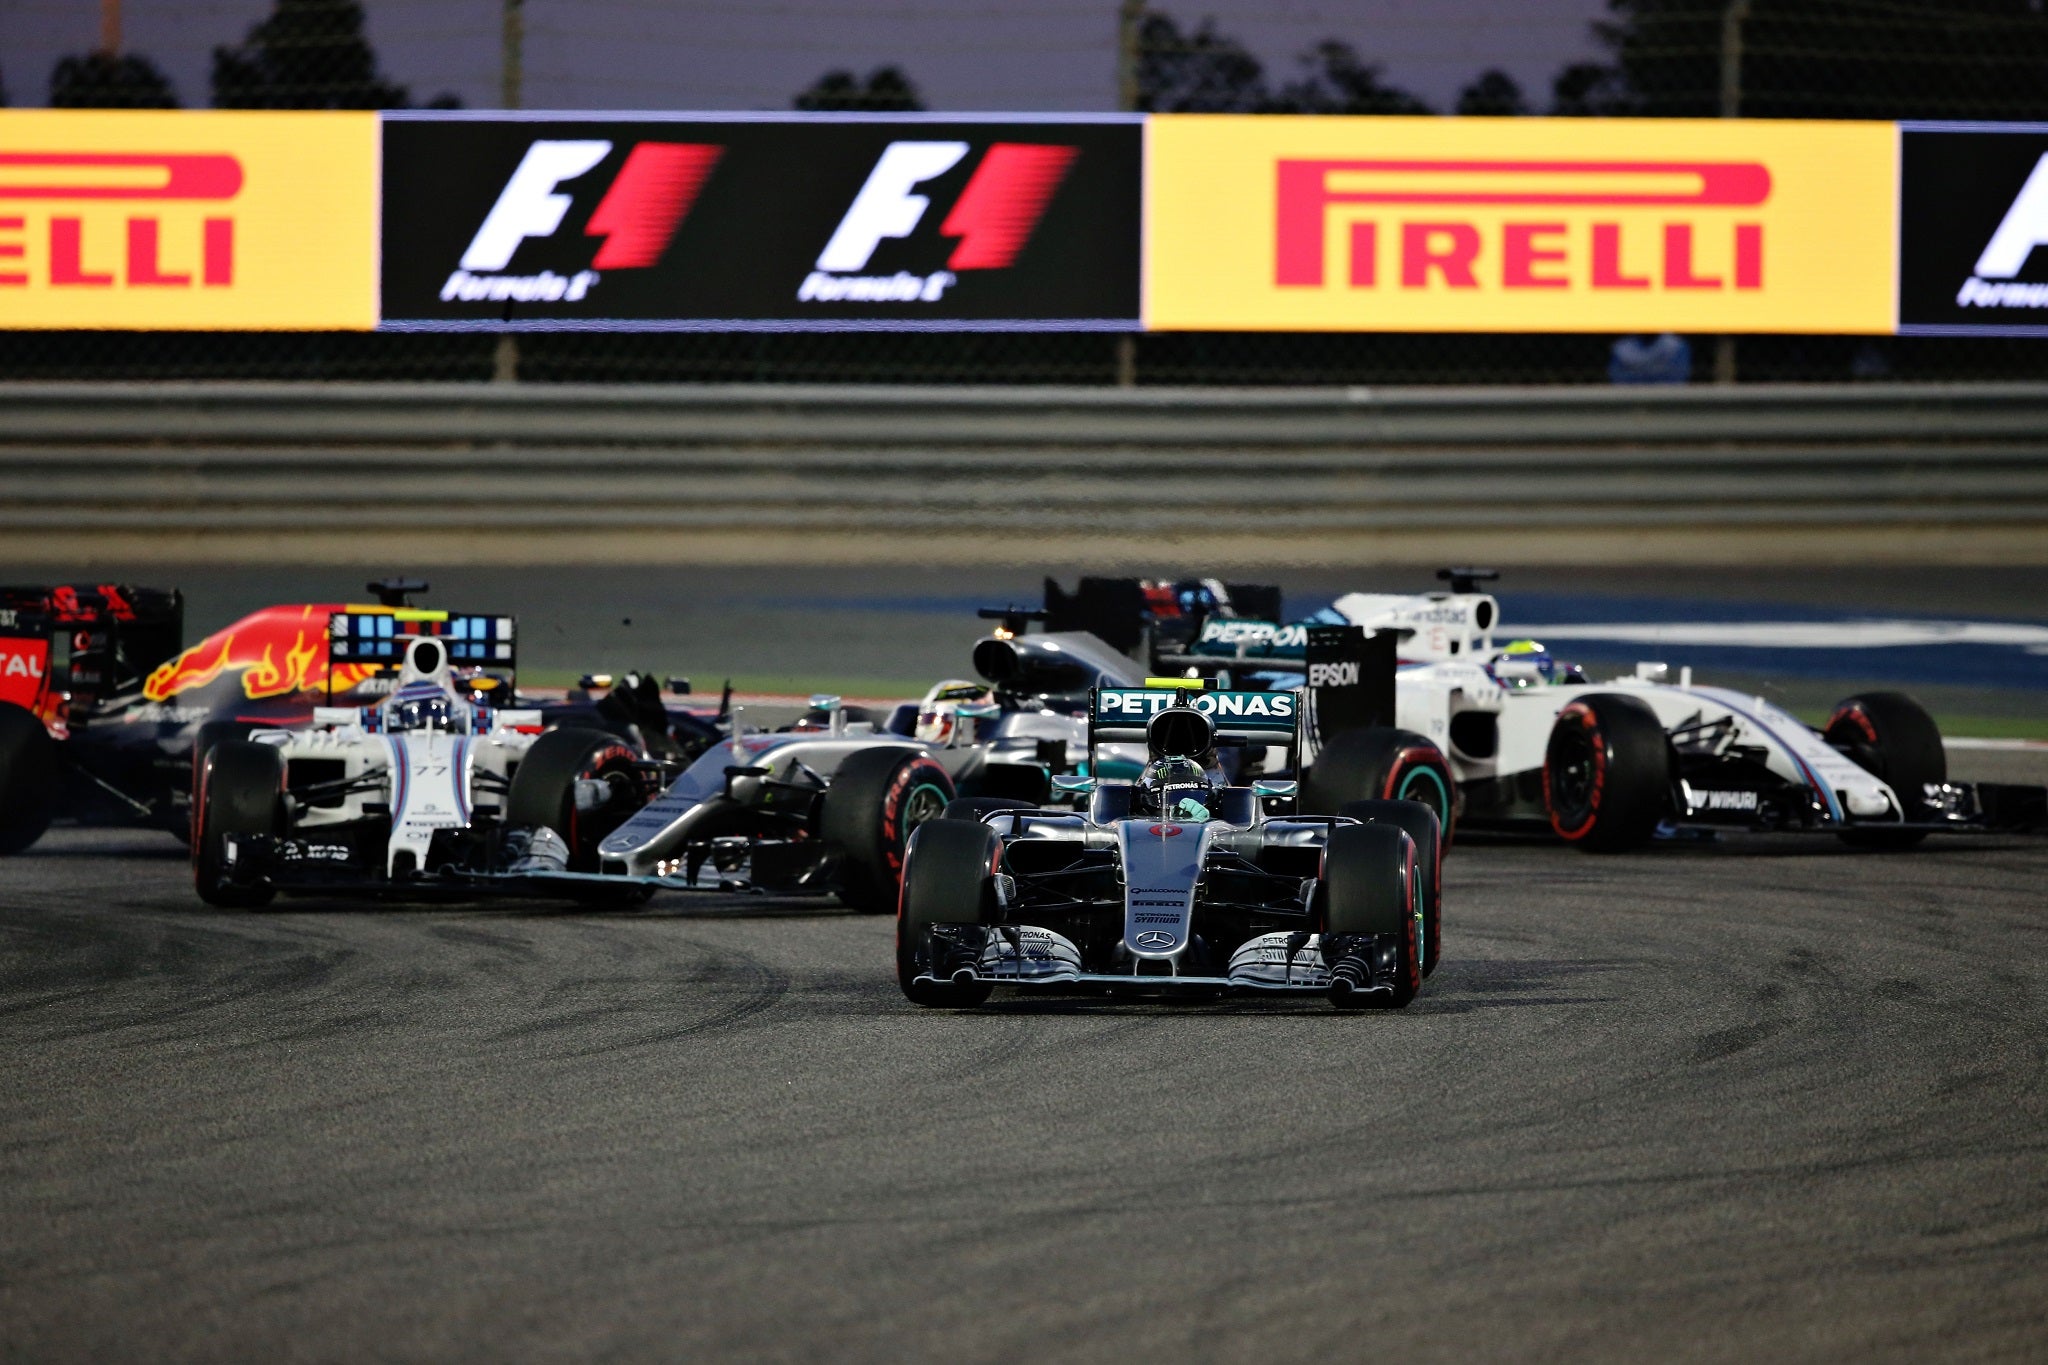 Lewis Hamilton is hit by Valtteri Bottas at the start of the Bahrain Grand Prix